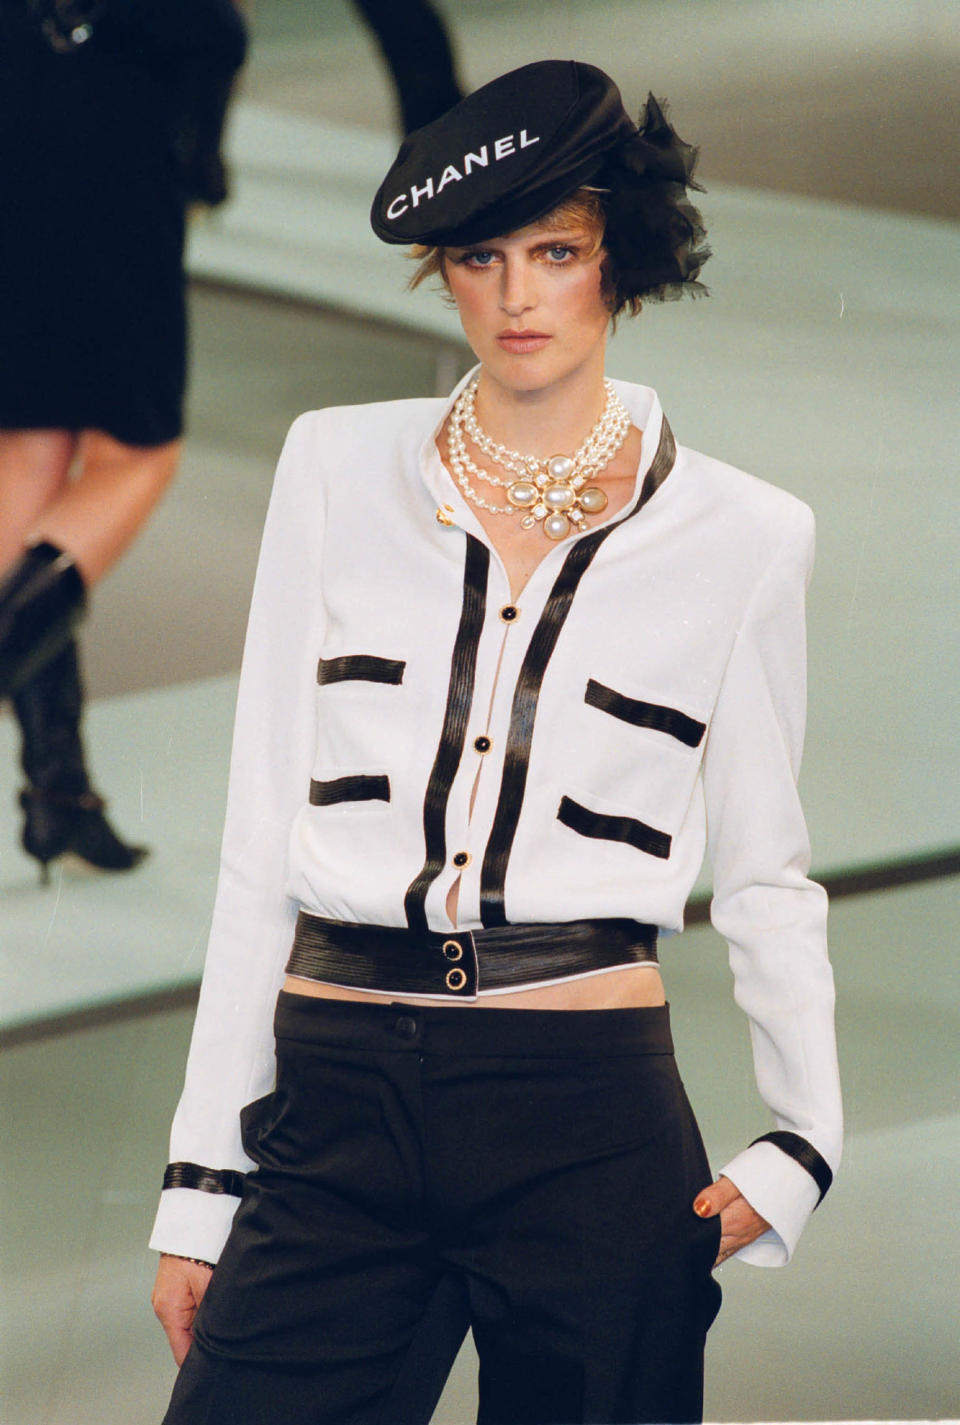 A model wears an outfit from Lagerfeld's spring/summer 2002 ready-to-wear fashion collection for Chanel, Oct. 10, 2001, in Paris.